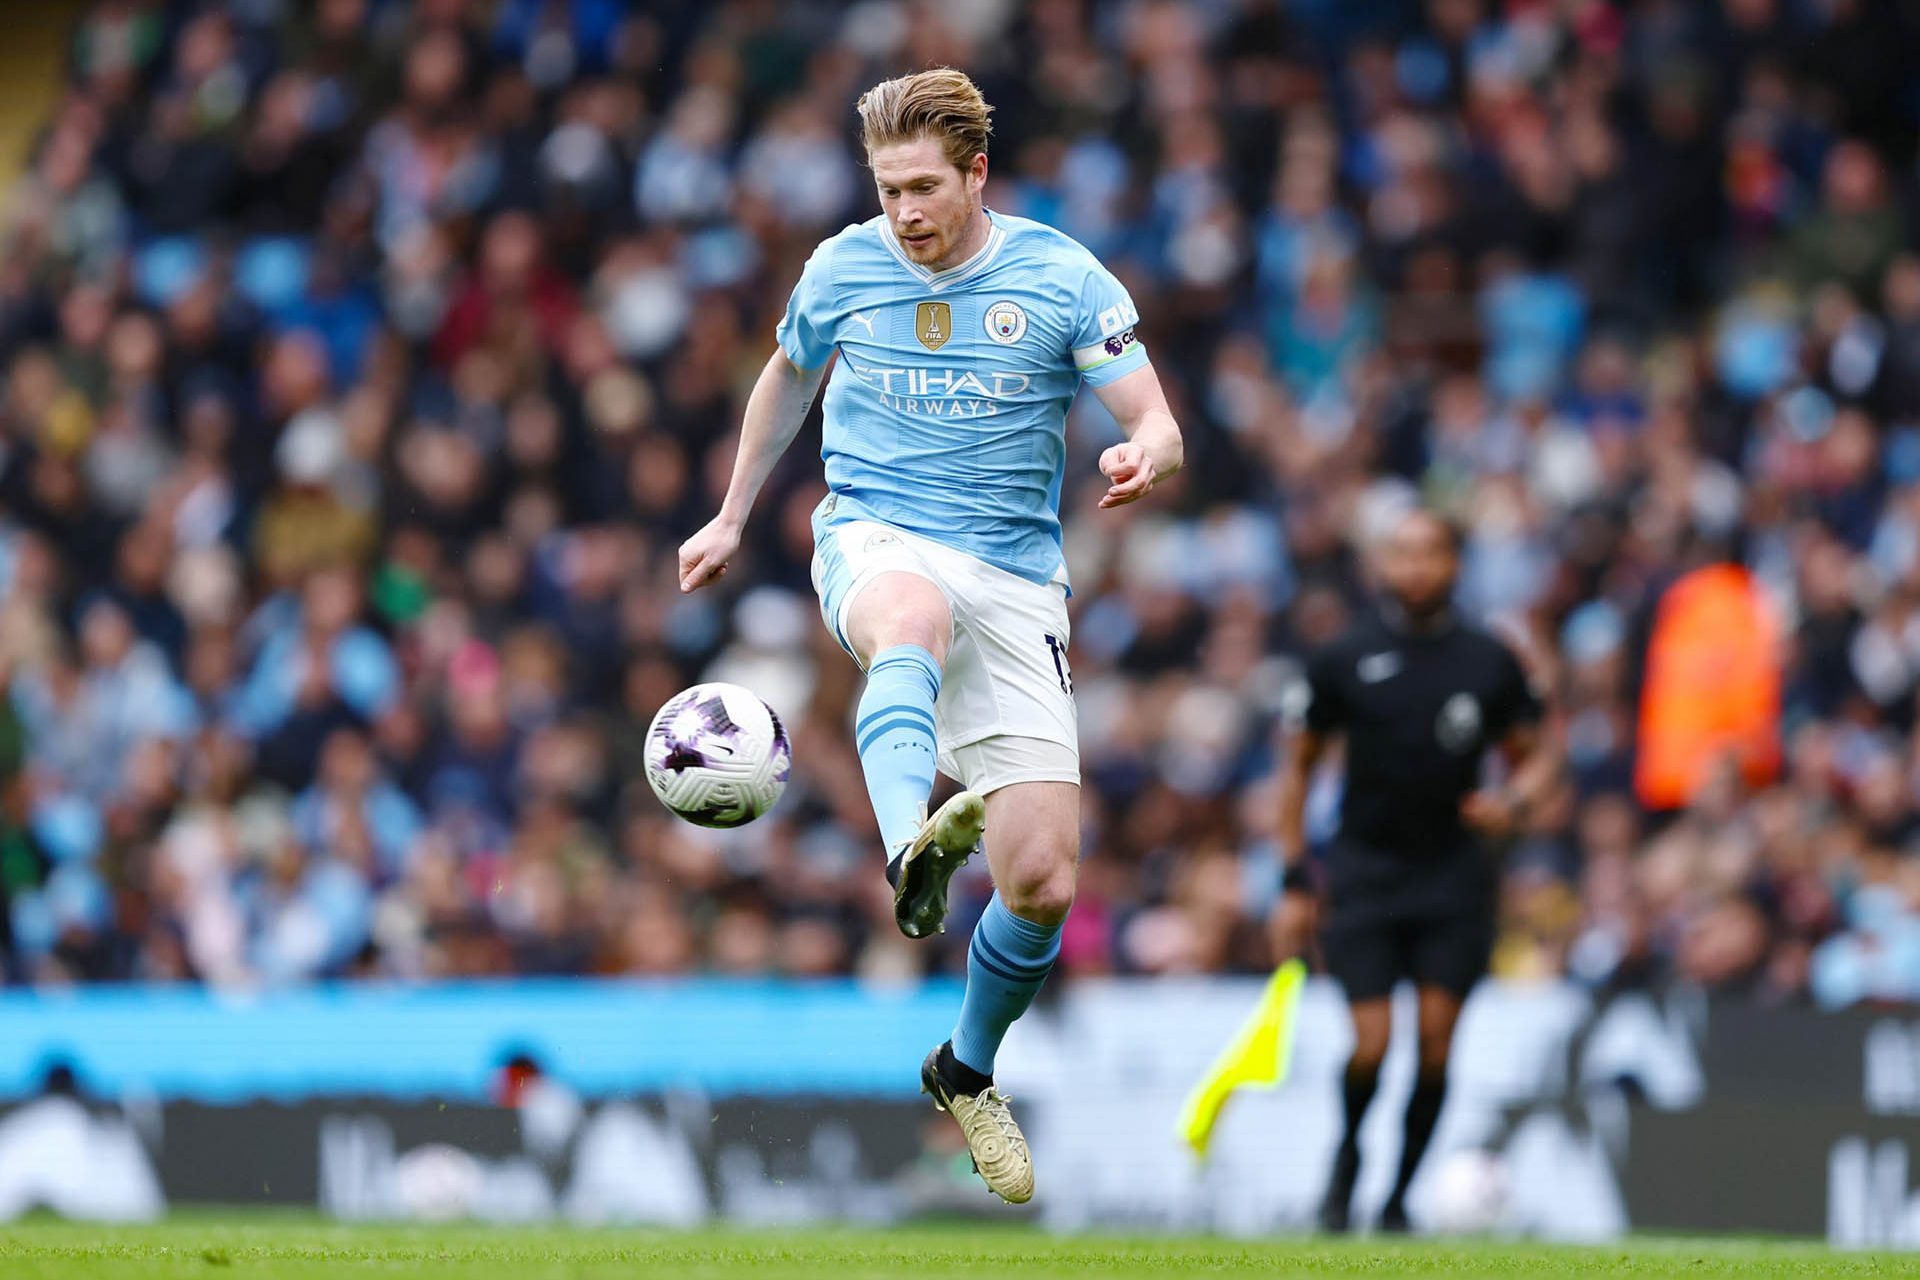 Kevin De Bruyne to Real Madrid? 